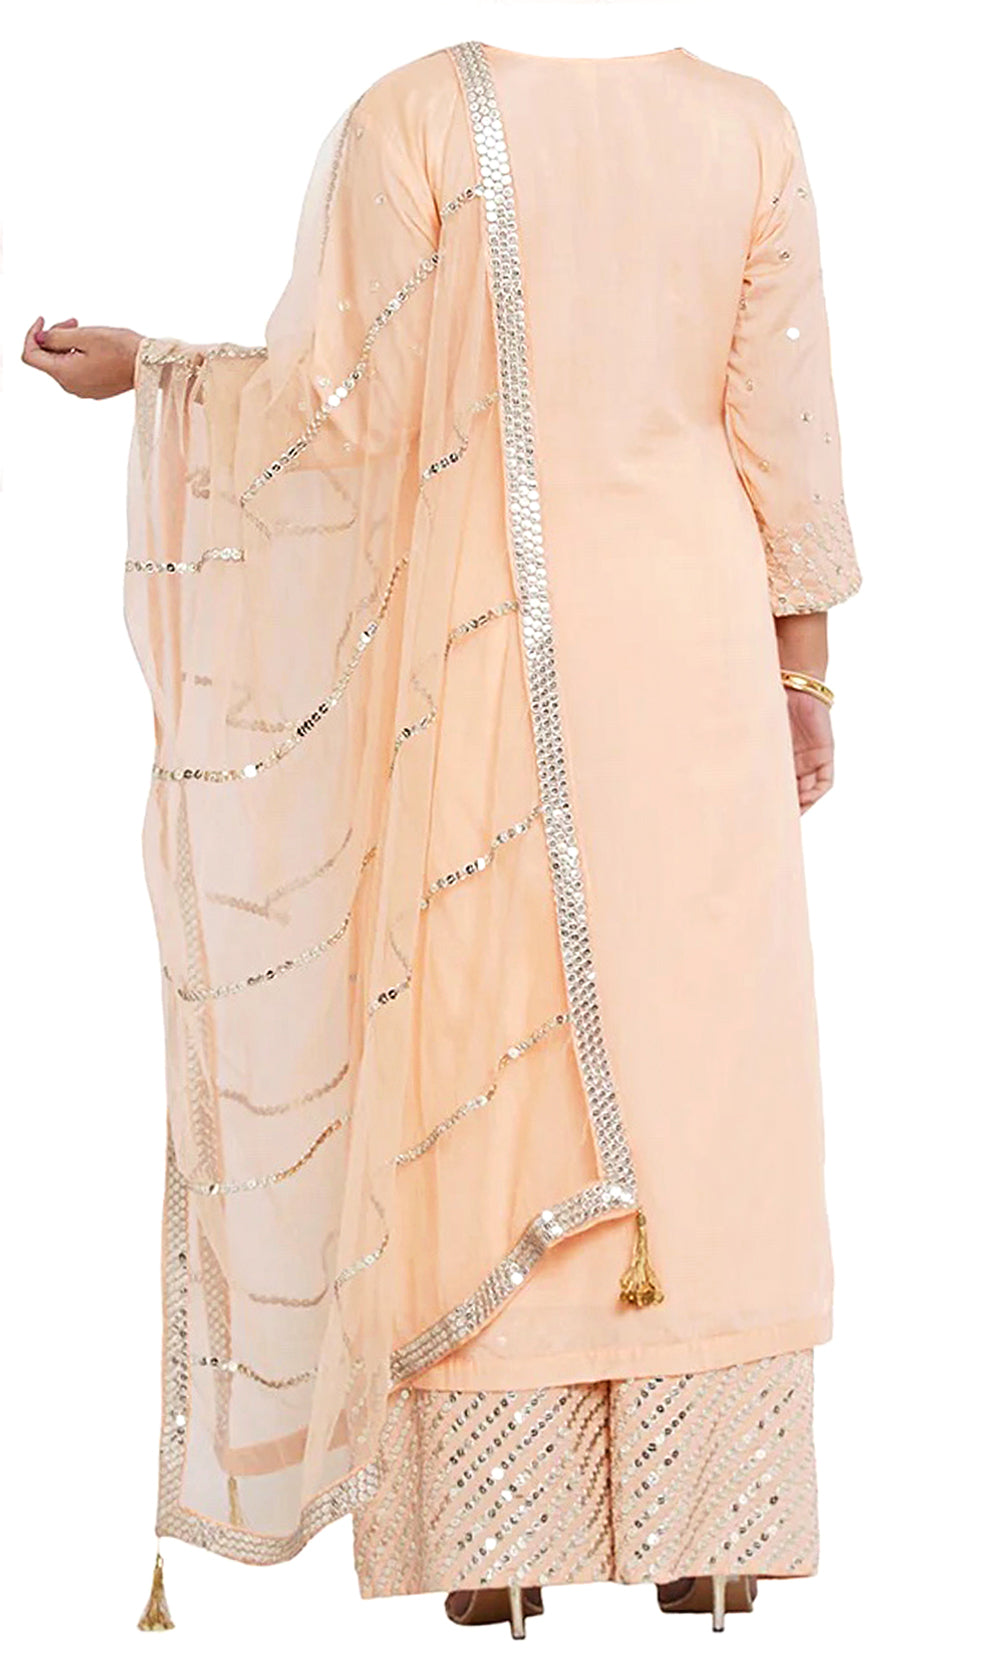 Sweetest Peach gorgeous, elegant pant suit! This 3-piece pink/peach colored palazzo suit is embroidered.